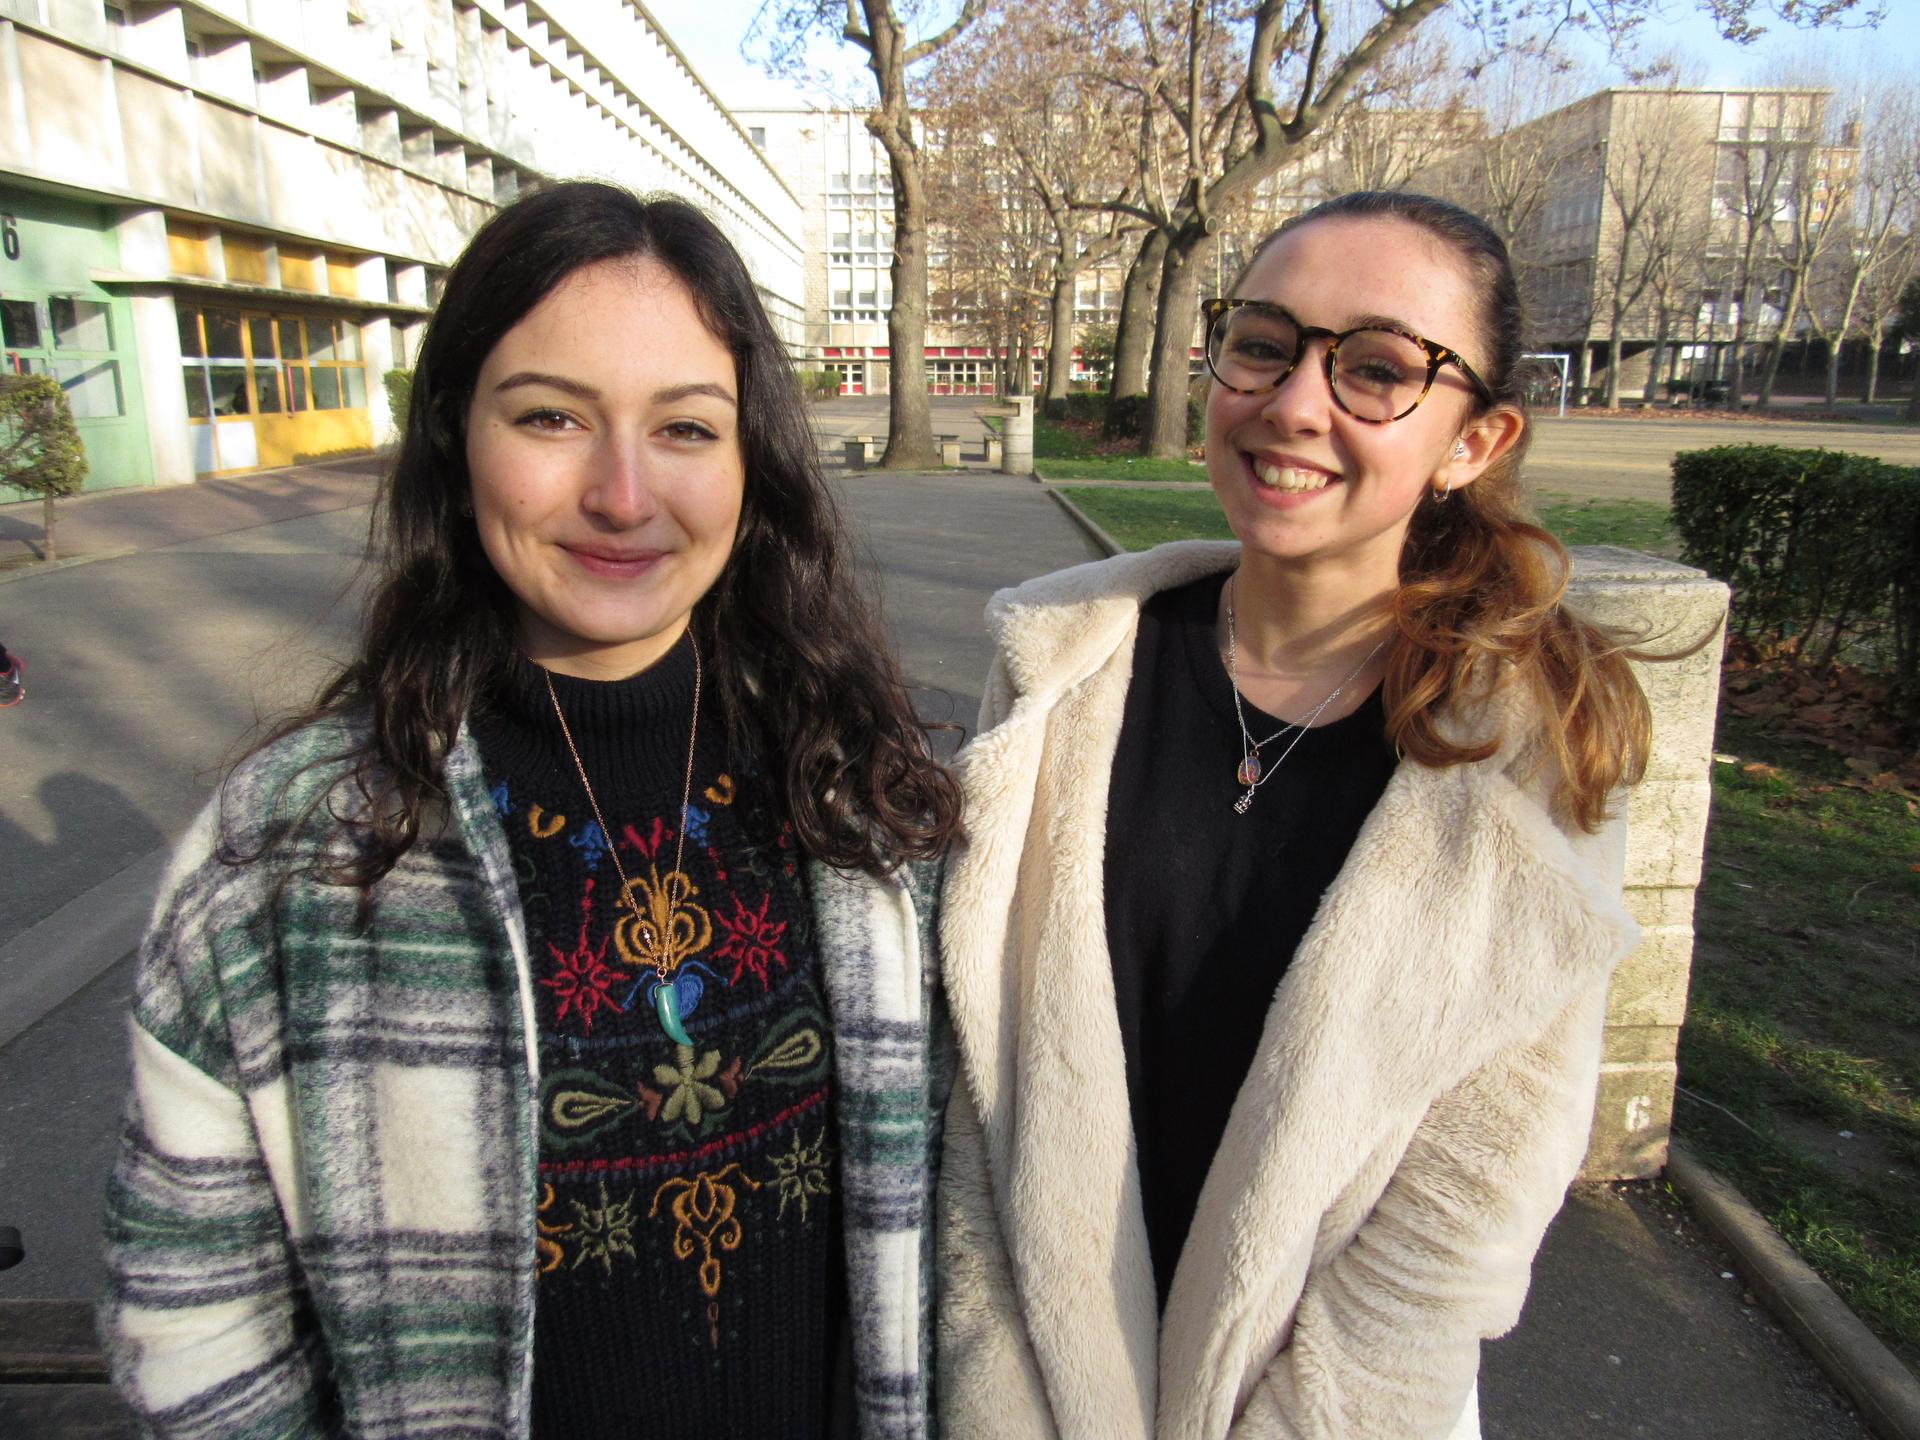 12th graders Chaden Alyahya Morla and Nour Fiquet won a student environmental journalism competition and were invited to the Paris Climate Conference, but their visit was canceled for security reasons after the Paris attacks.